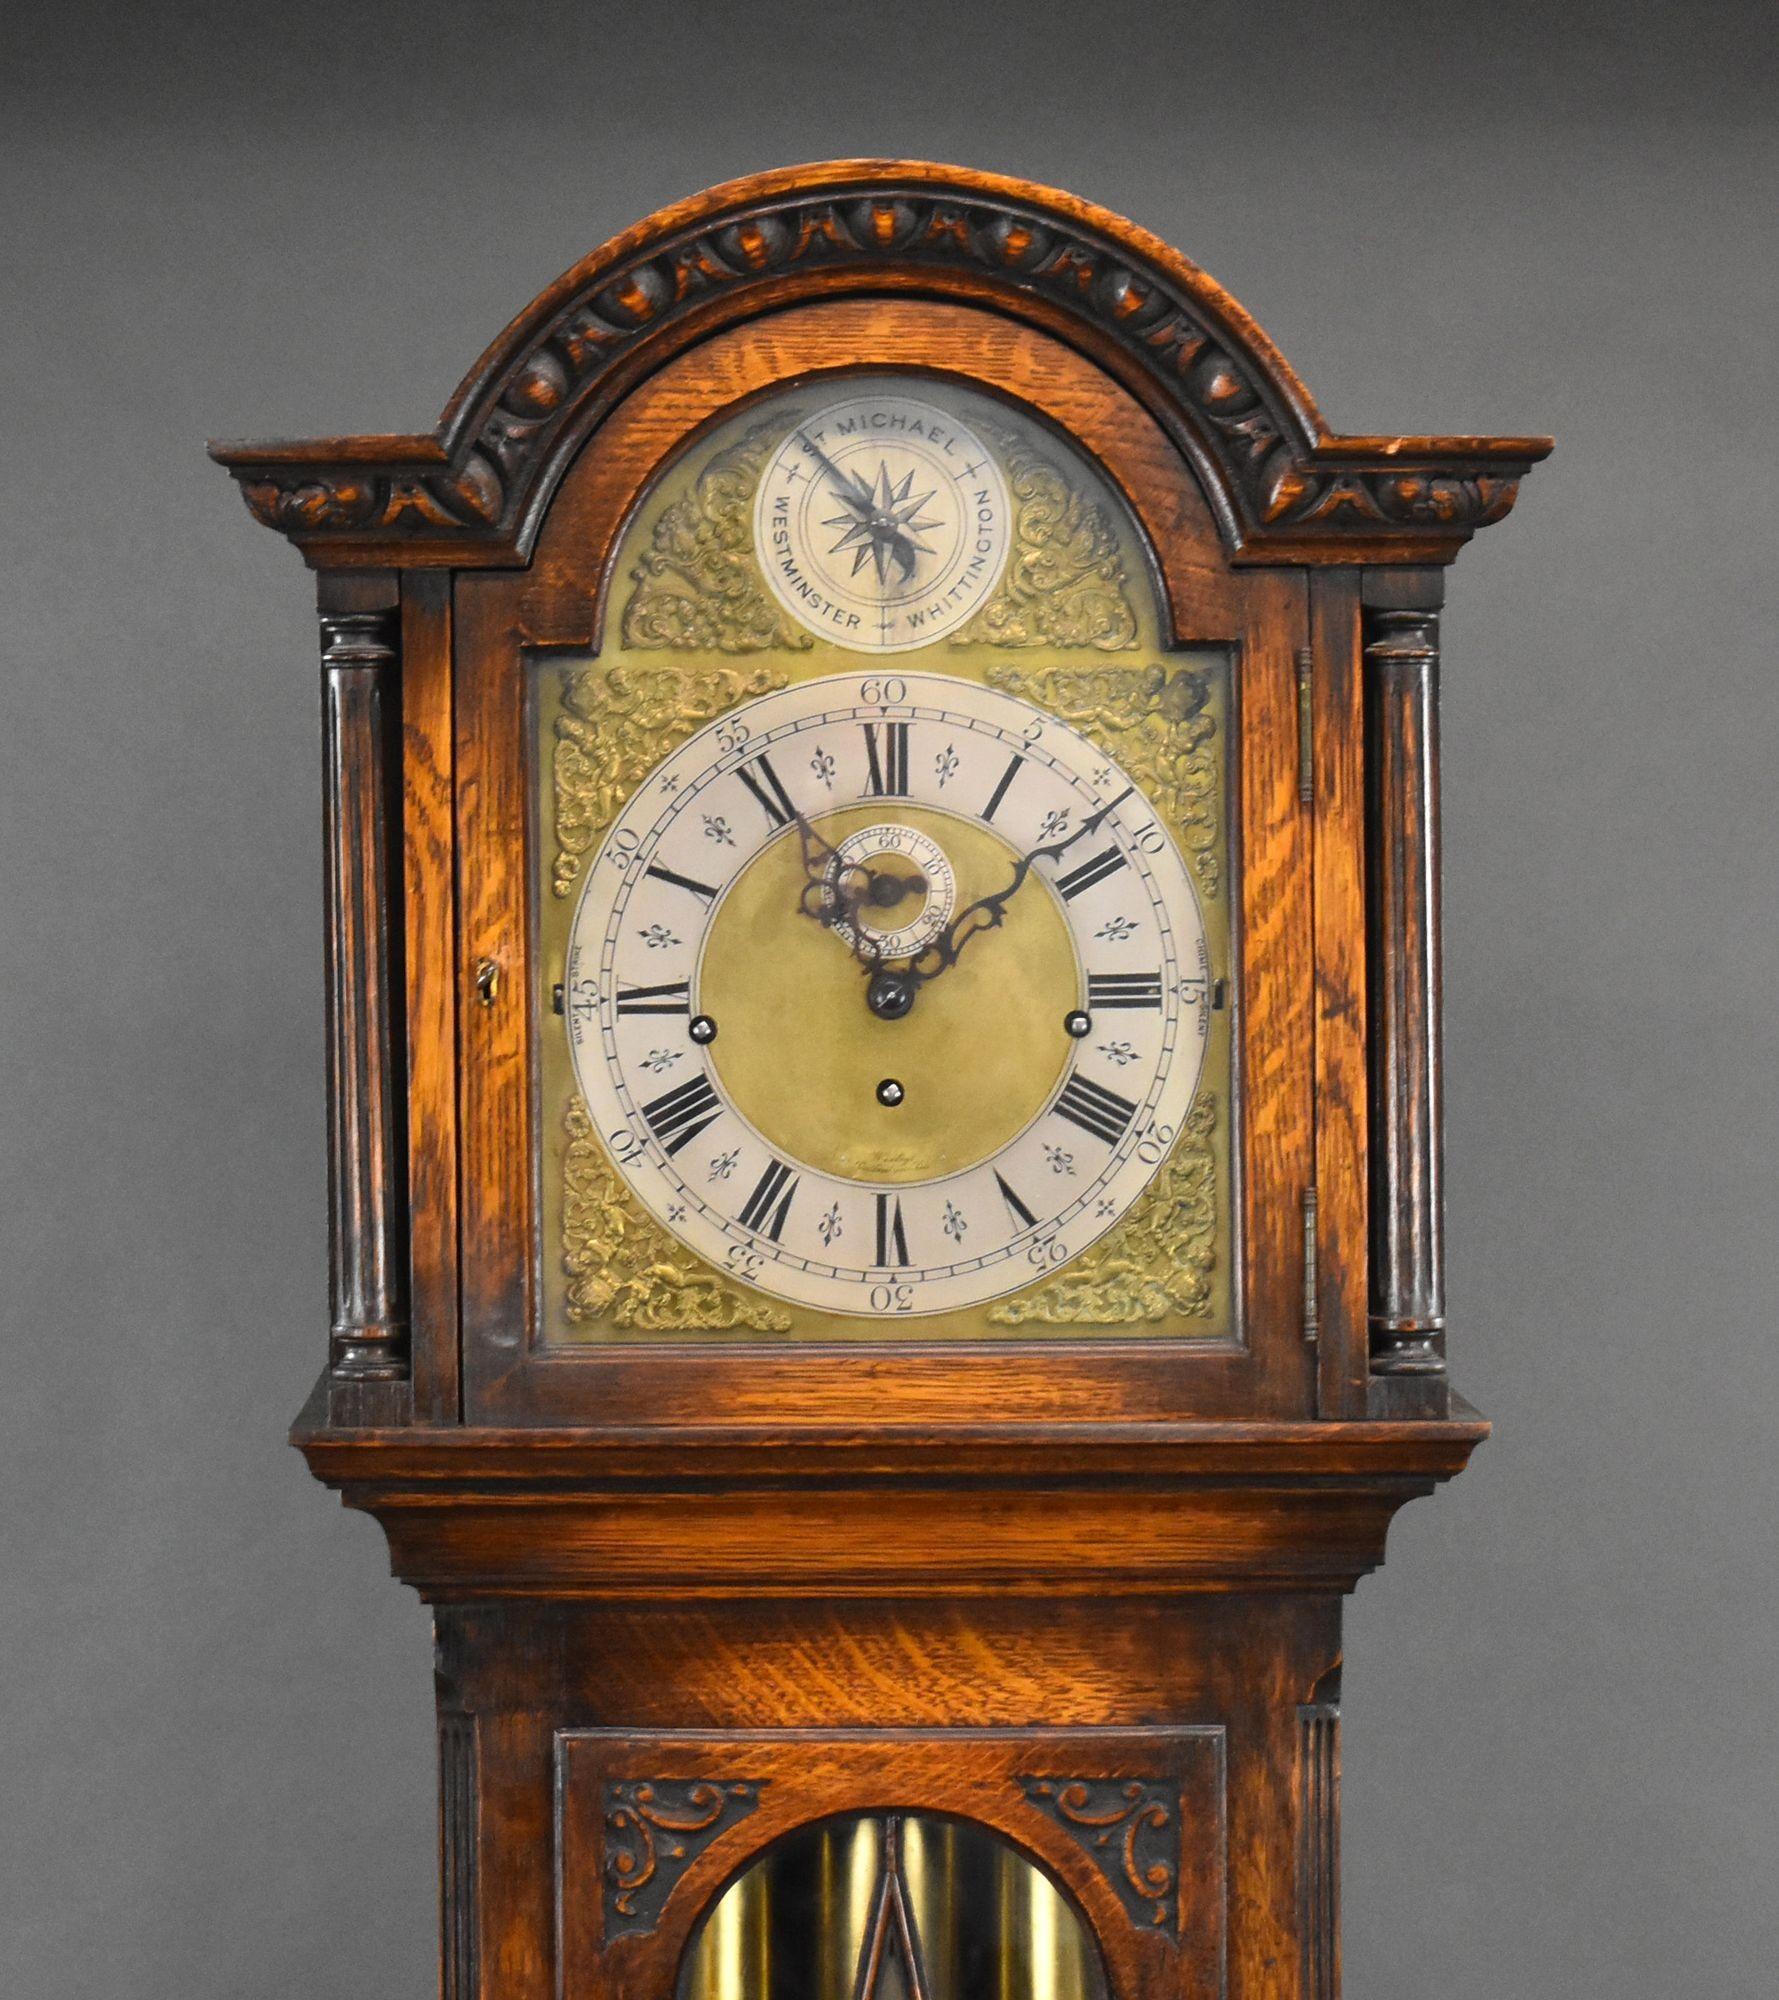 For sale is a good quality Edwardian oak 9 tube grandfather clock, having a brass dial with roman numerals and ornate hands, above a glazed door opening to reveal the pendulum and weights, above the base of the case, standing on small feet. The